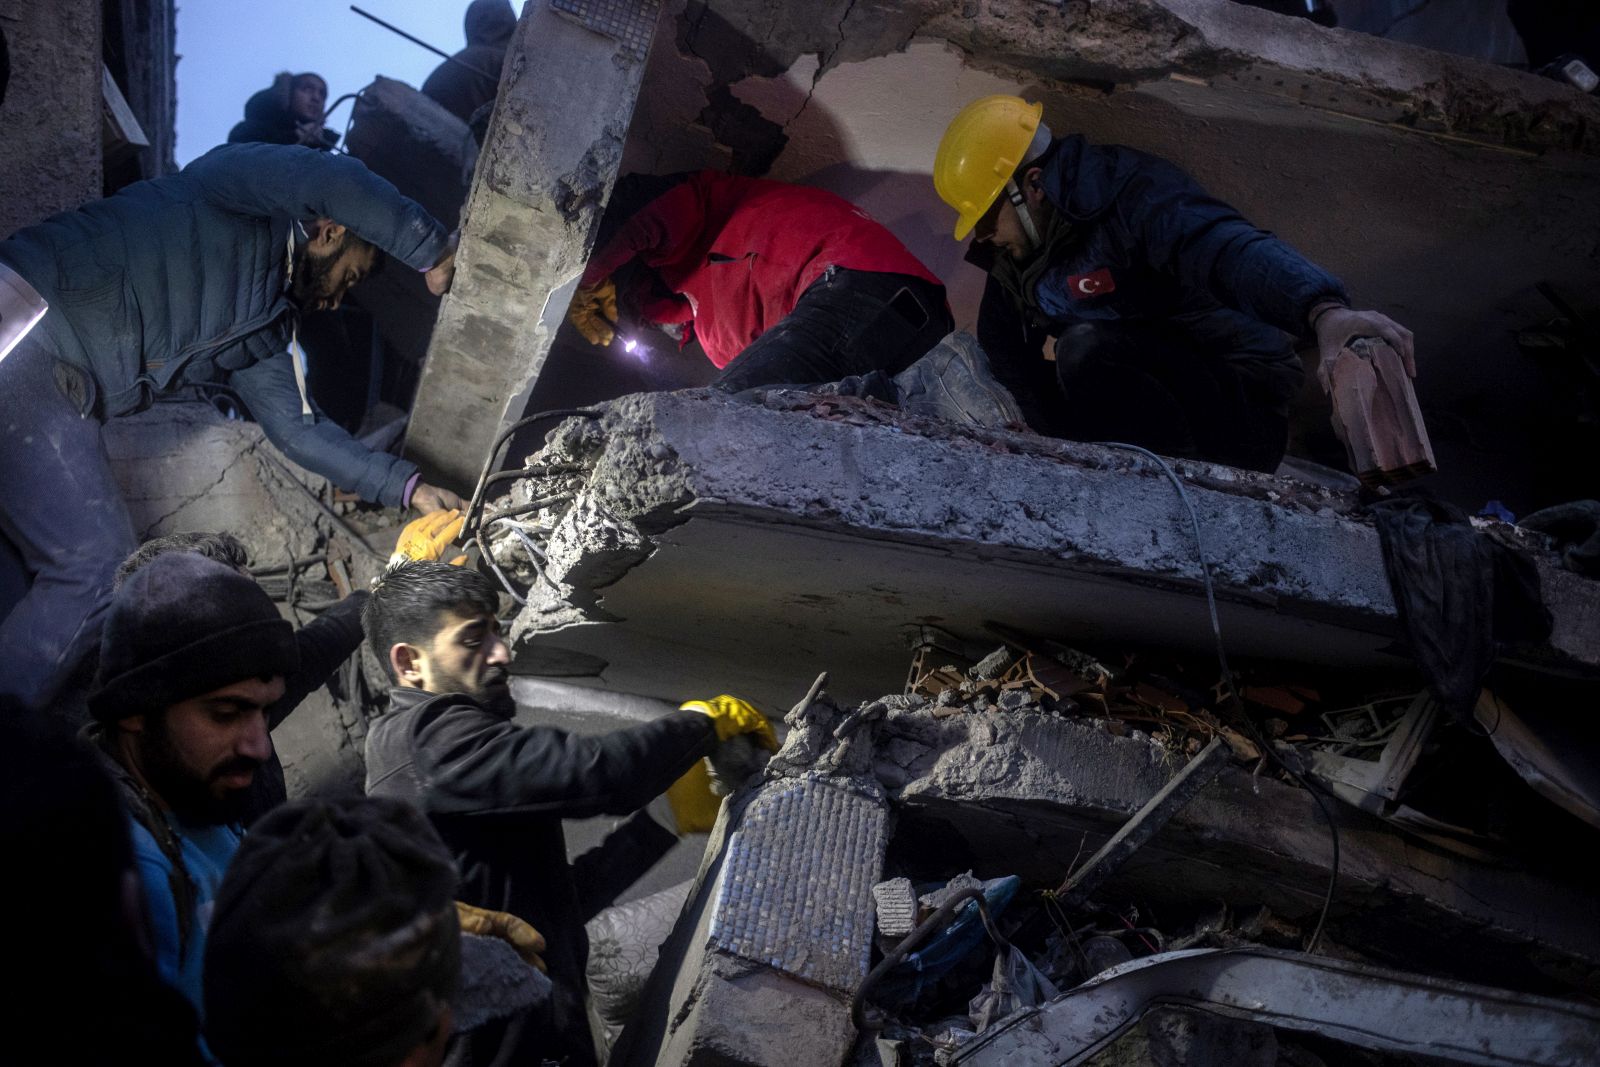 epa10450297 Turkish emergency personnel and others try to help victims at the site of a collapsed building after an earthquake in Diyarbakir, Turkey, 06 February 2023. According to the US Geological Service, an earthquake with a preliminary magnitude of 7.8 struck southeast Turkey close to the Syrian border. The earthquake caused buildings to collapse and sent shockwaves over northwest Syria, Cyprus, and Lebanon.  EPA/REFIK TEKIN